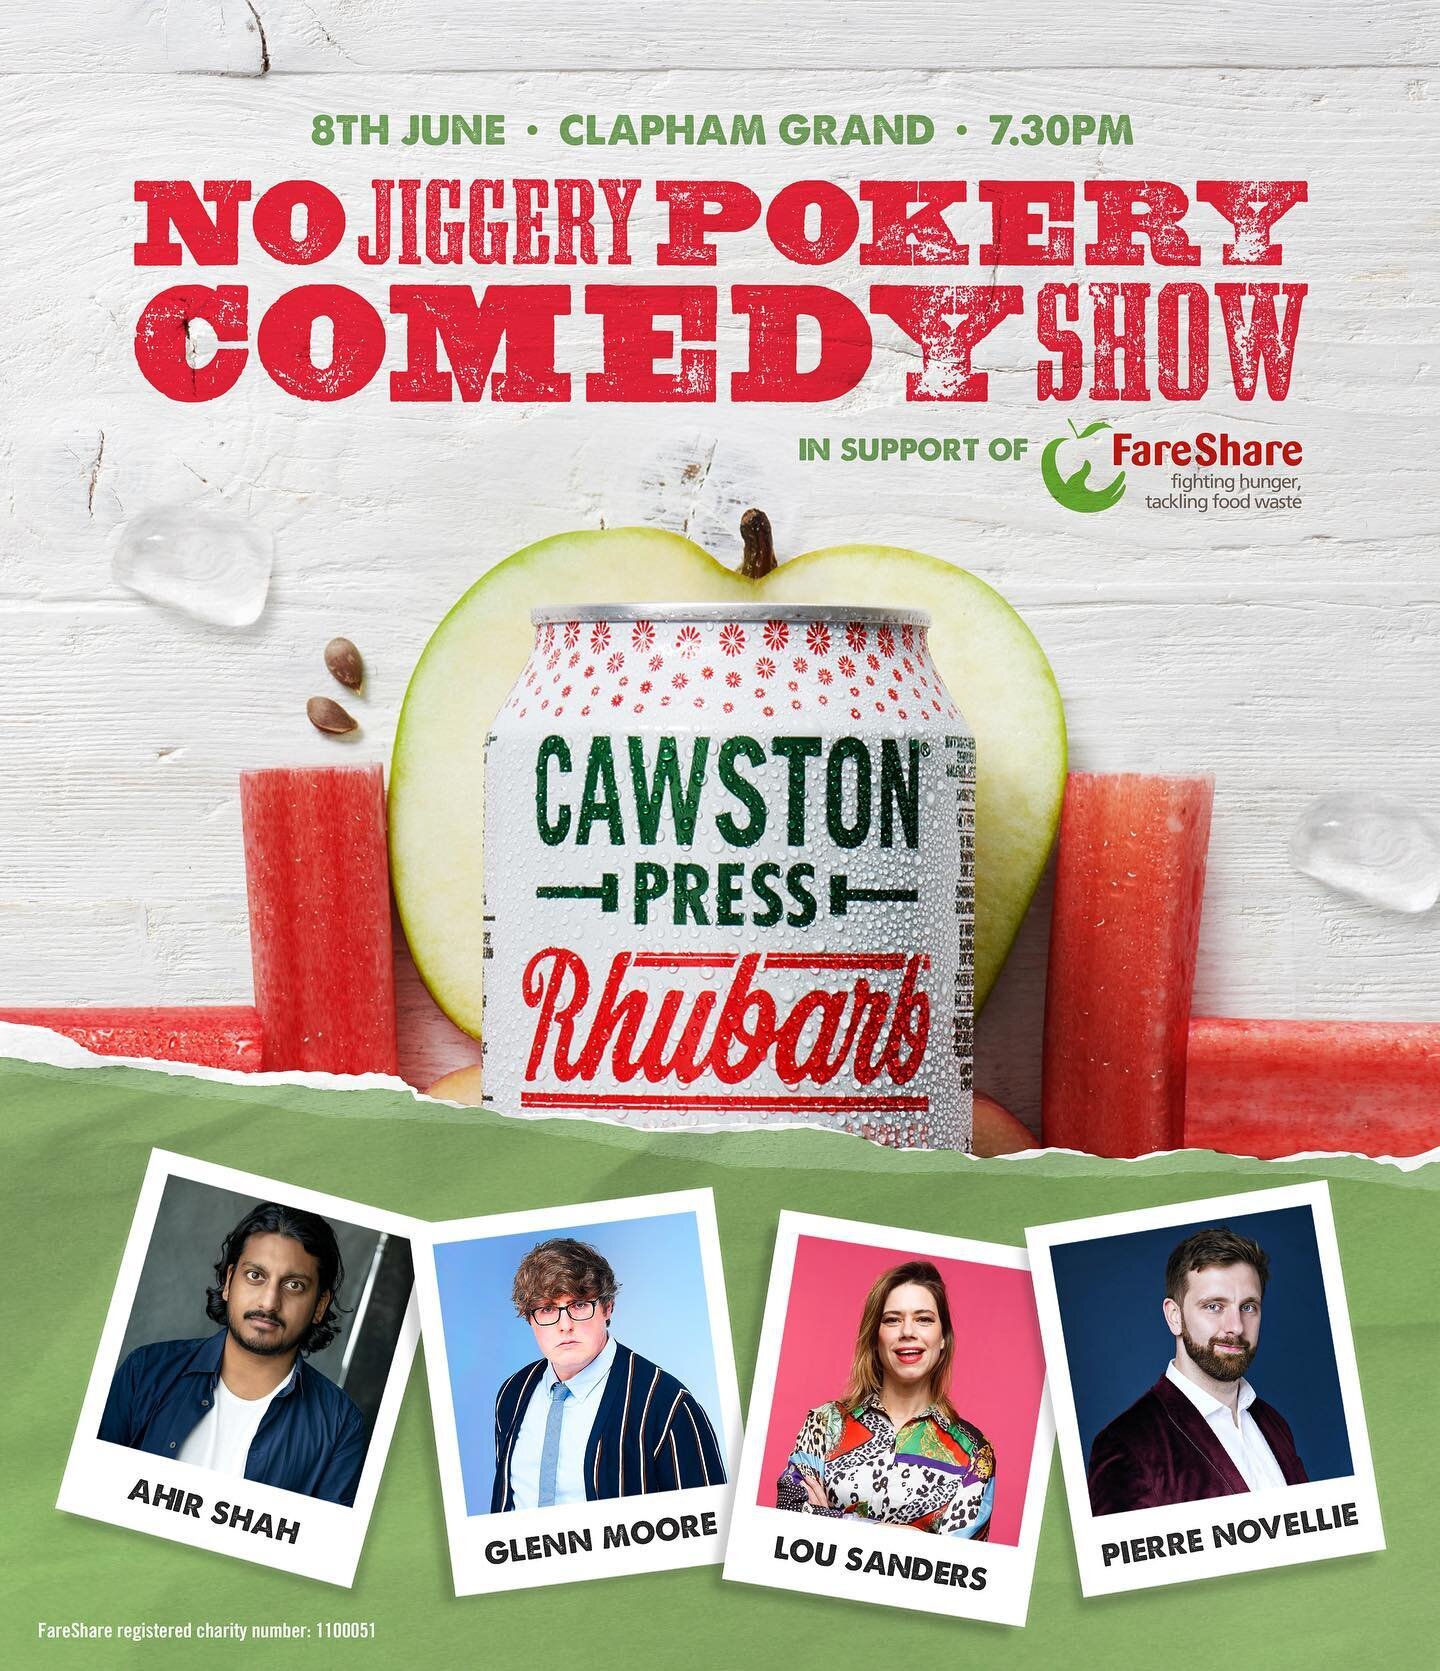 Exciting news! @cawstonpress has announced the No Jiggery Pokery Comedy Show, which is being held for one night only at London&rsquo;s Clapham Grand on Thursday 8th June, in support of its charity partner @fareshareuk 🍏

We invite you all to join us